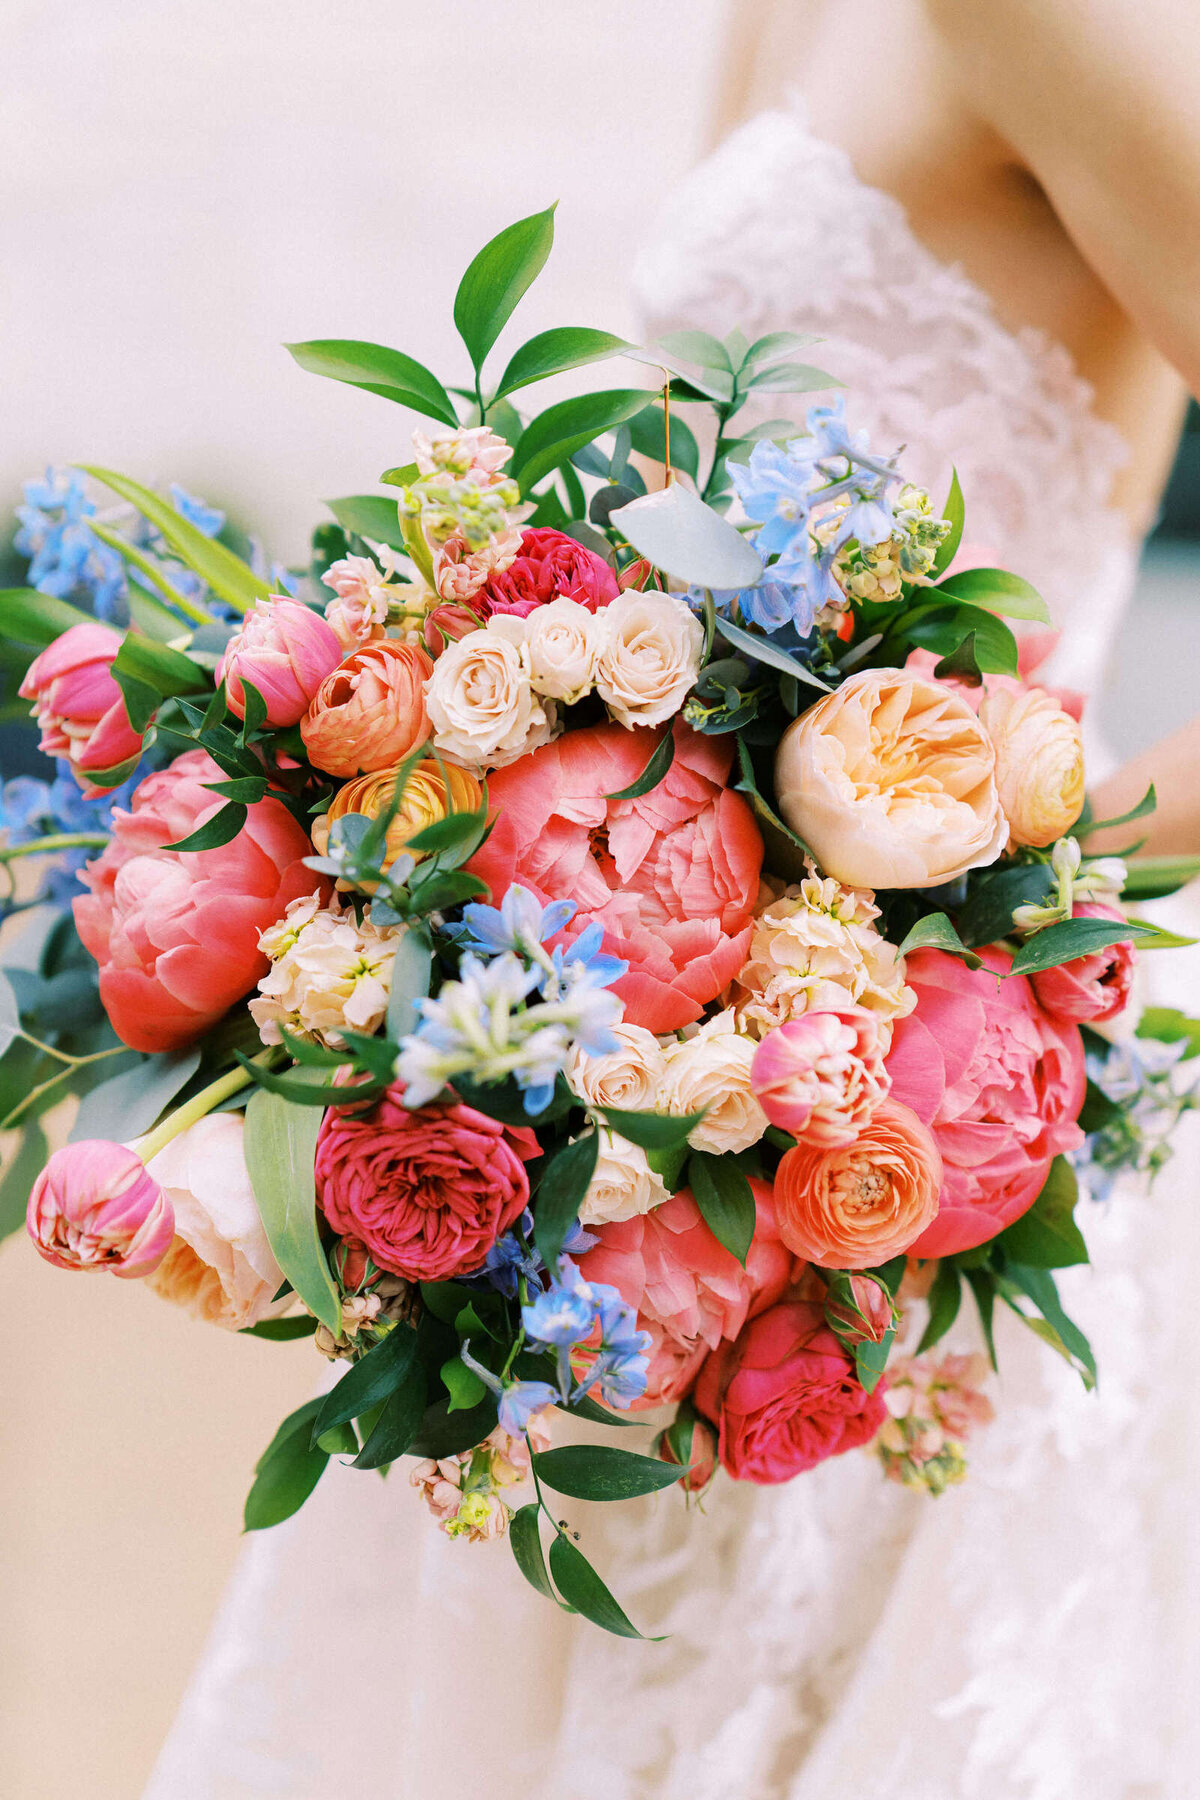 Rainbow bridal bouquet with peonies and roses